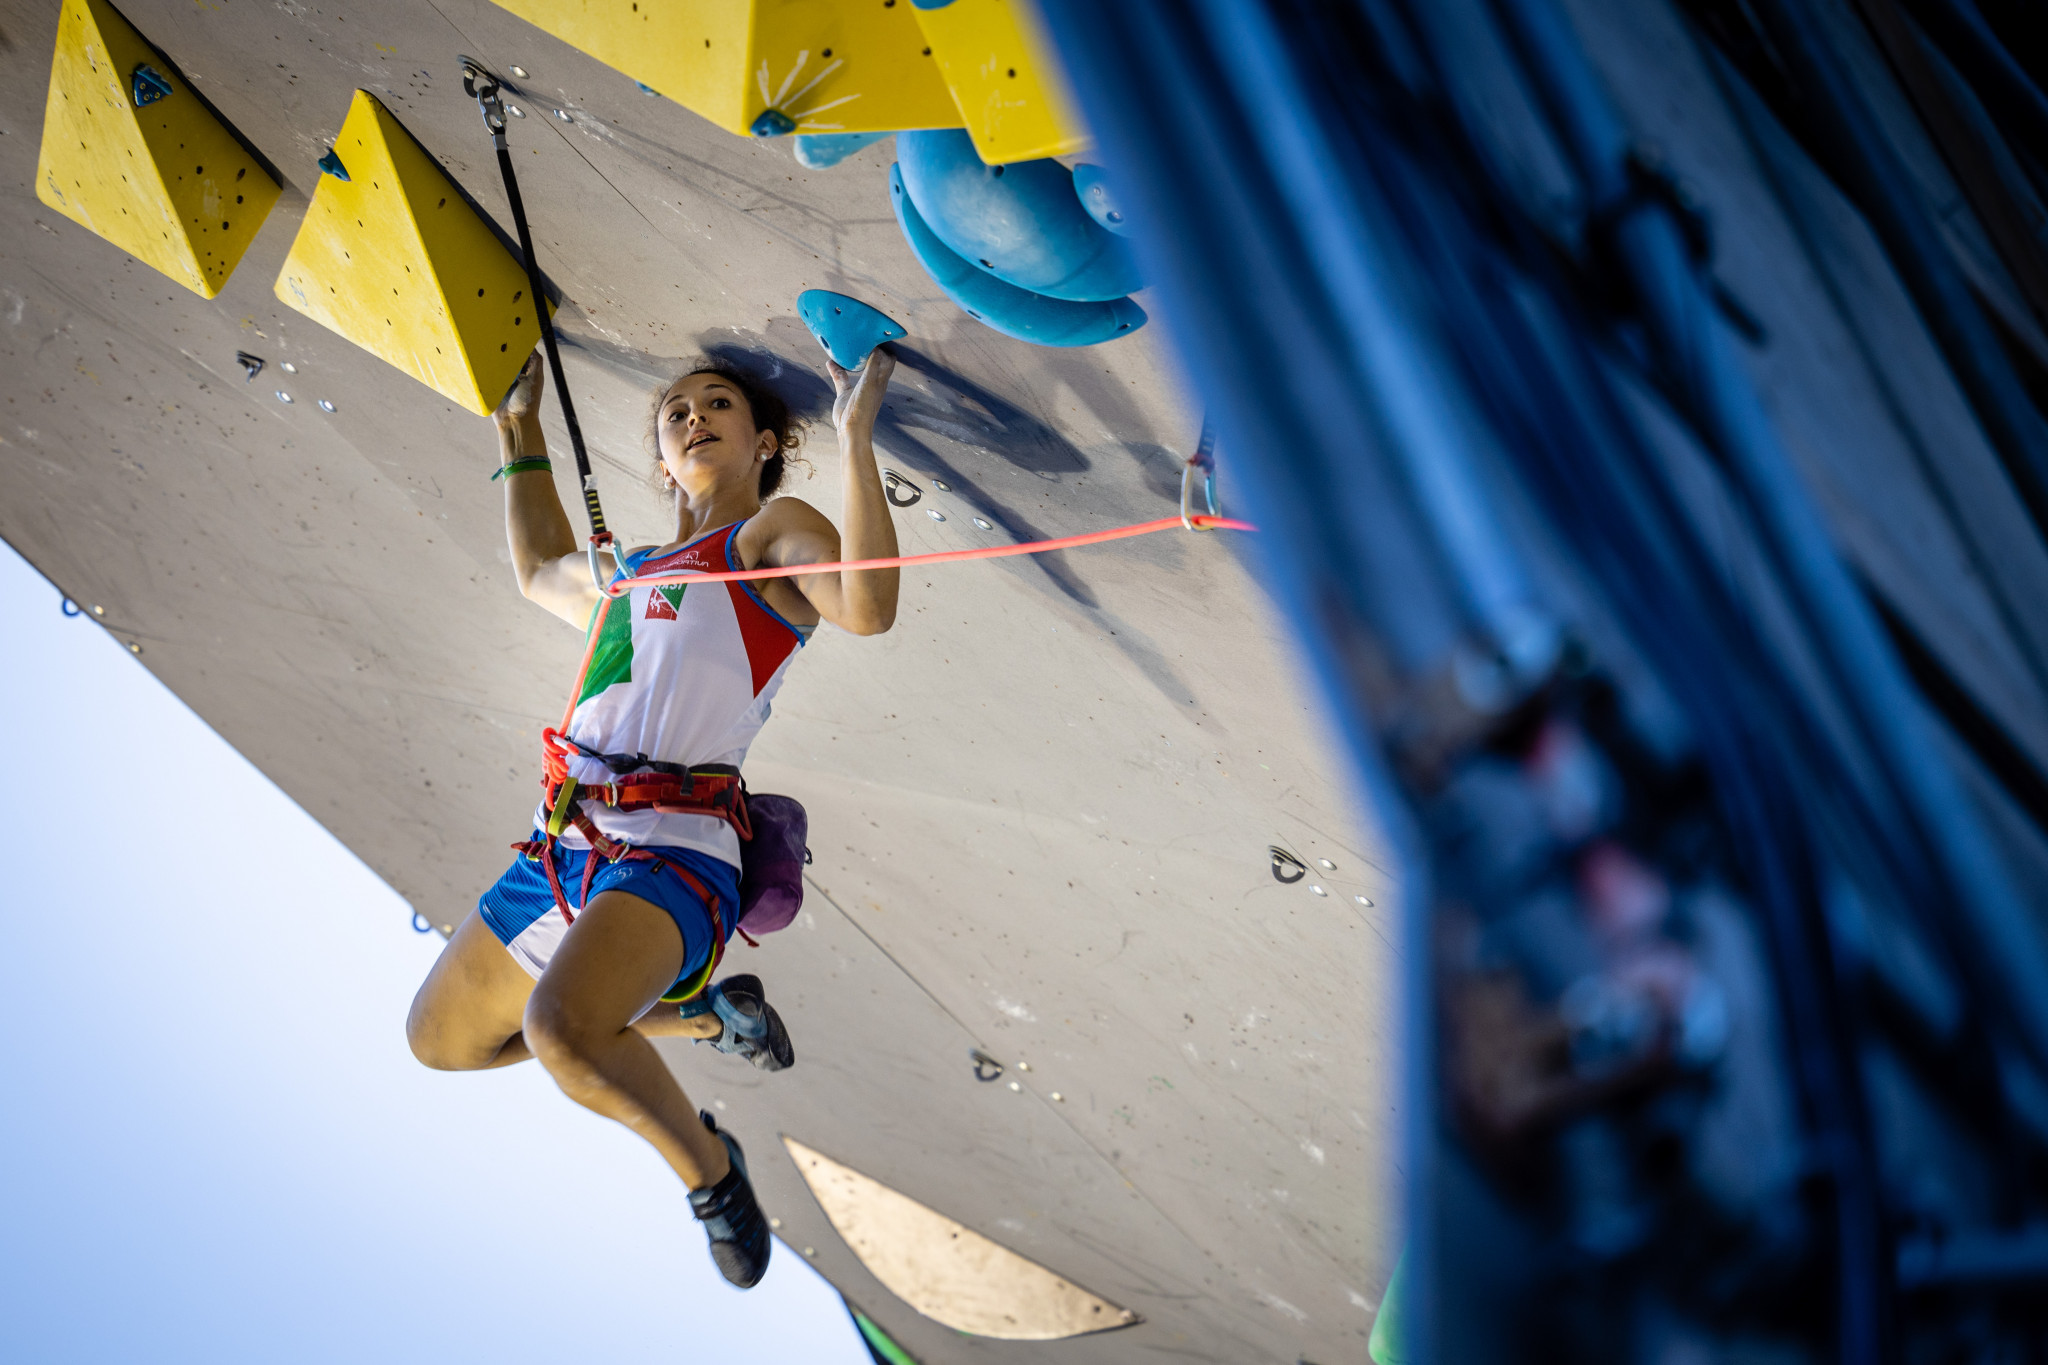 Italy's Tesio Giorgia in action during the 2020 IFSC World Cup in Briançon ©IFSC